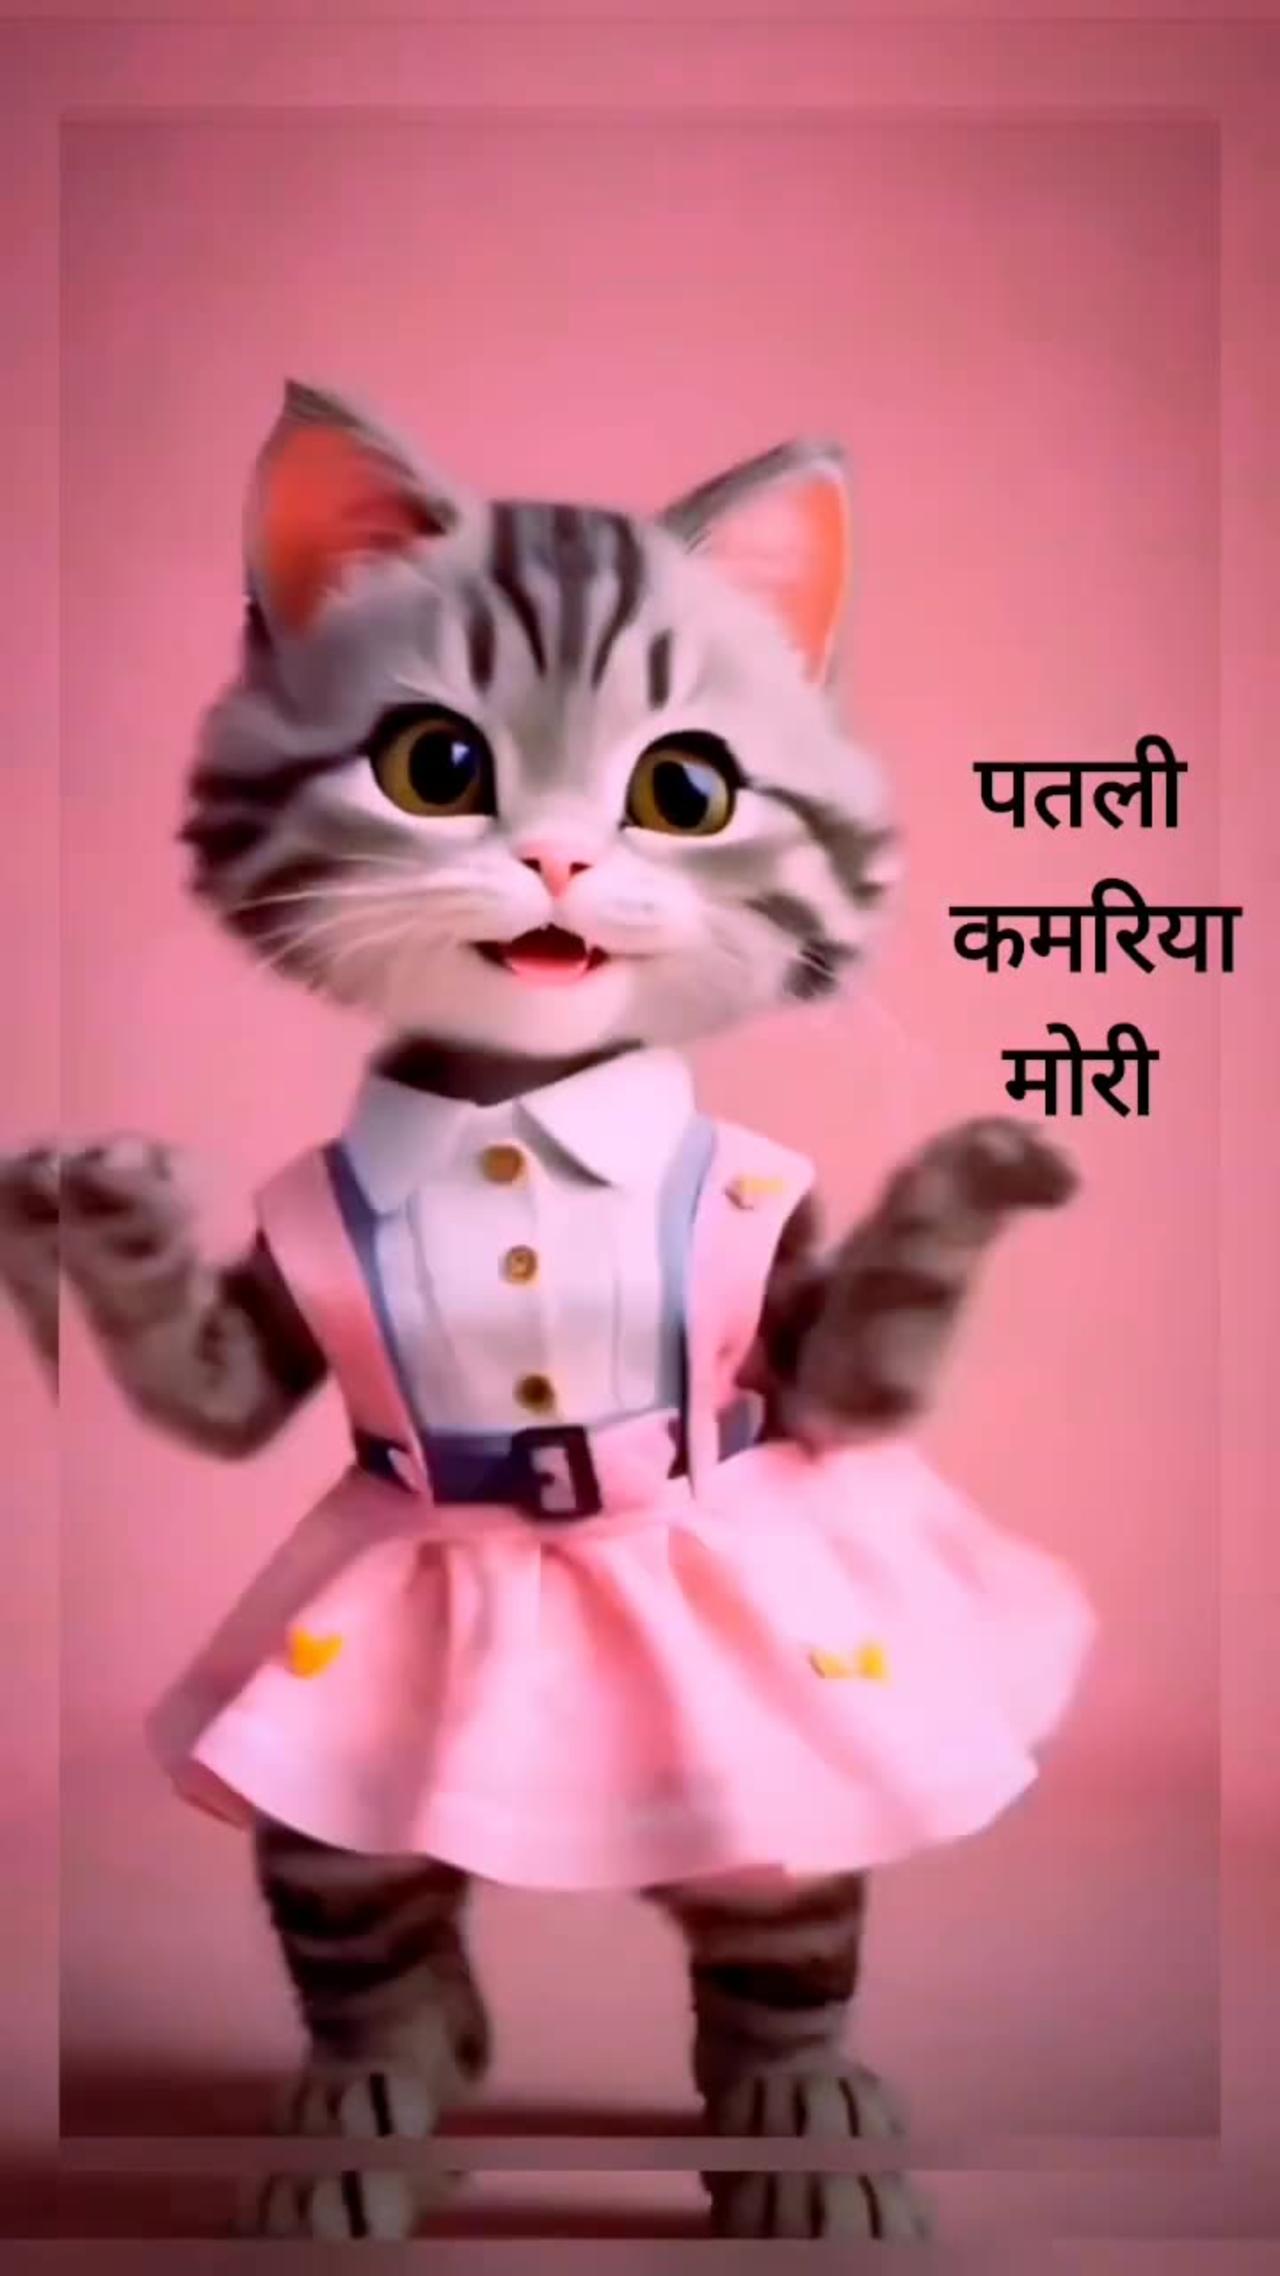 Cute baby cat dance with ai GERNET video 😂🤑